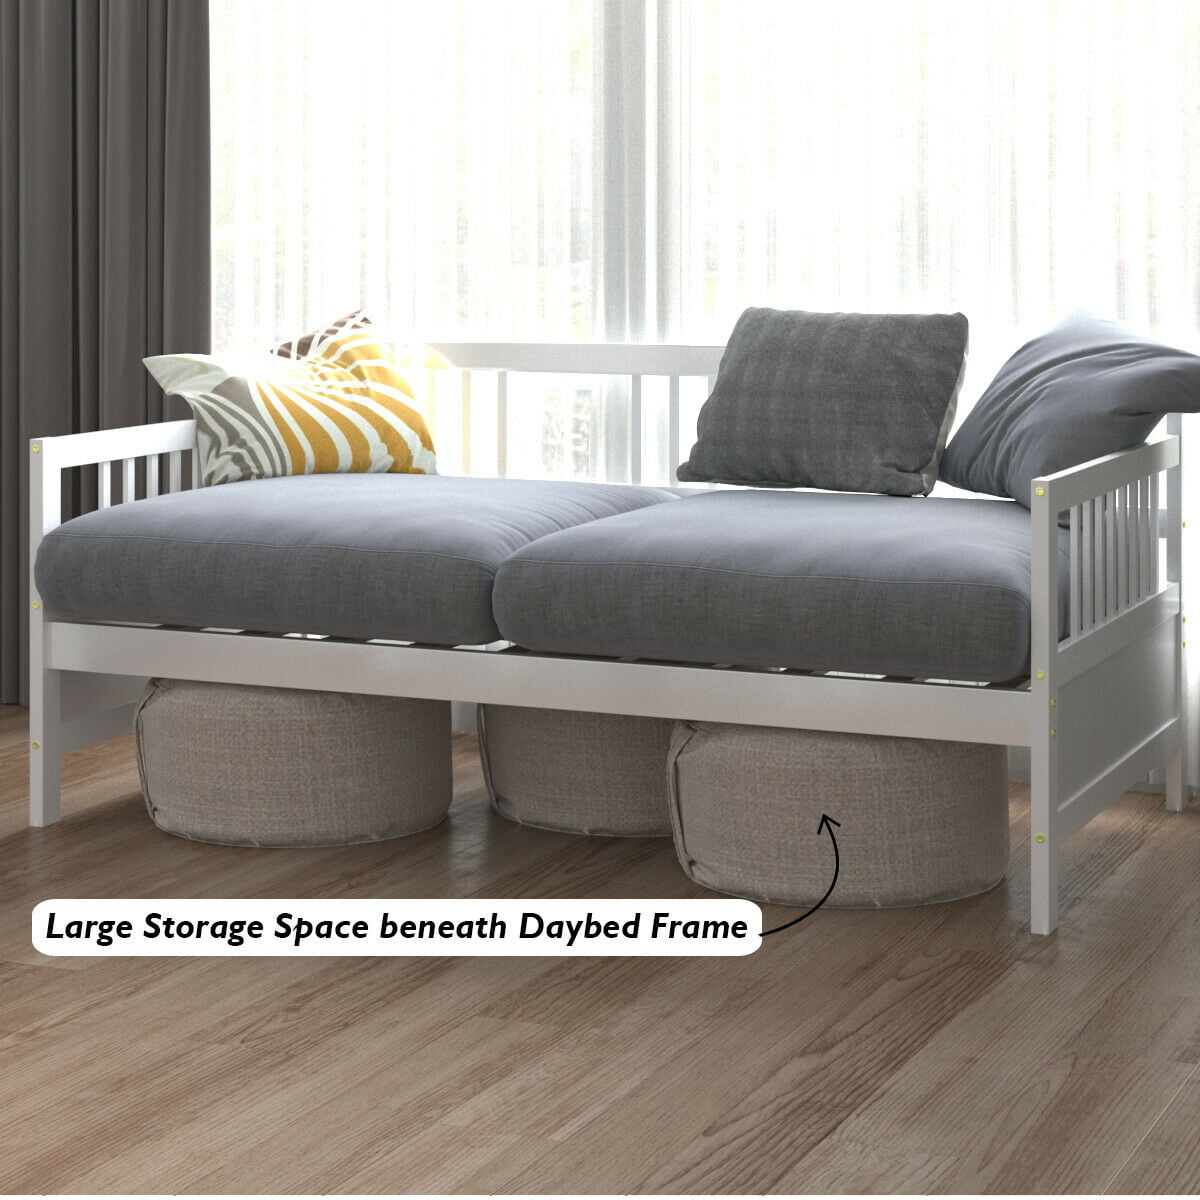 Twin Size Wooden Slats Daybed Bed Sofa Support Platform Sturdy W/Rails White 